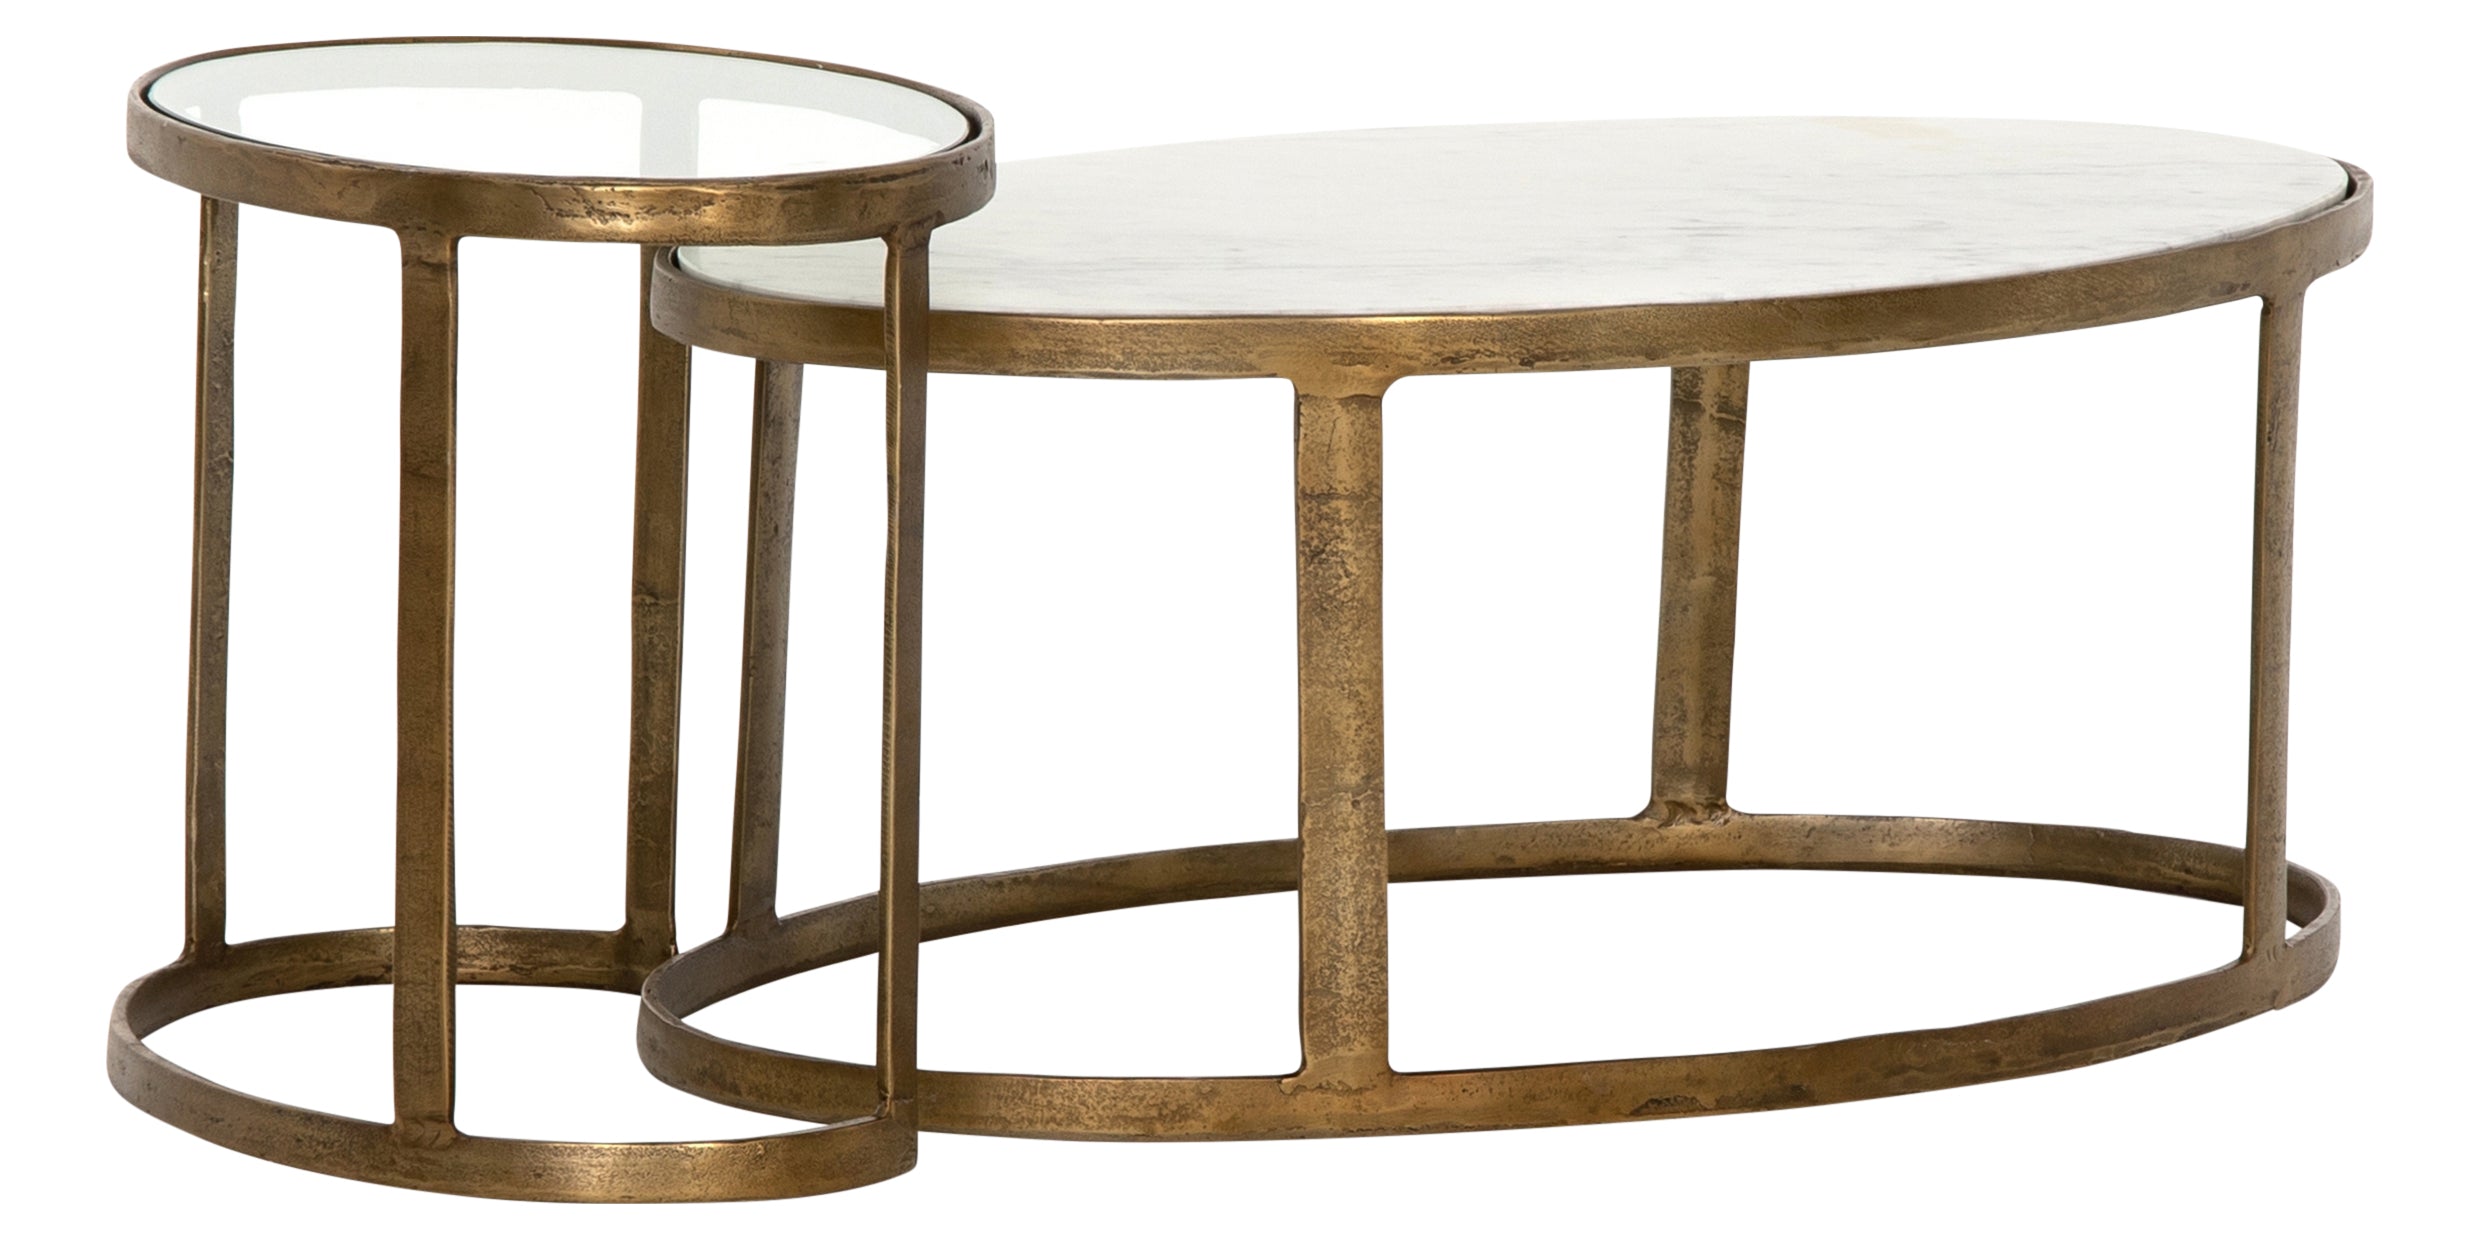 Polished White Marble & Tempered Glass with Raw Brass | Calder Nesting Coffee Table | Valley Ridge Furniture